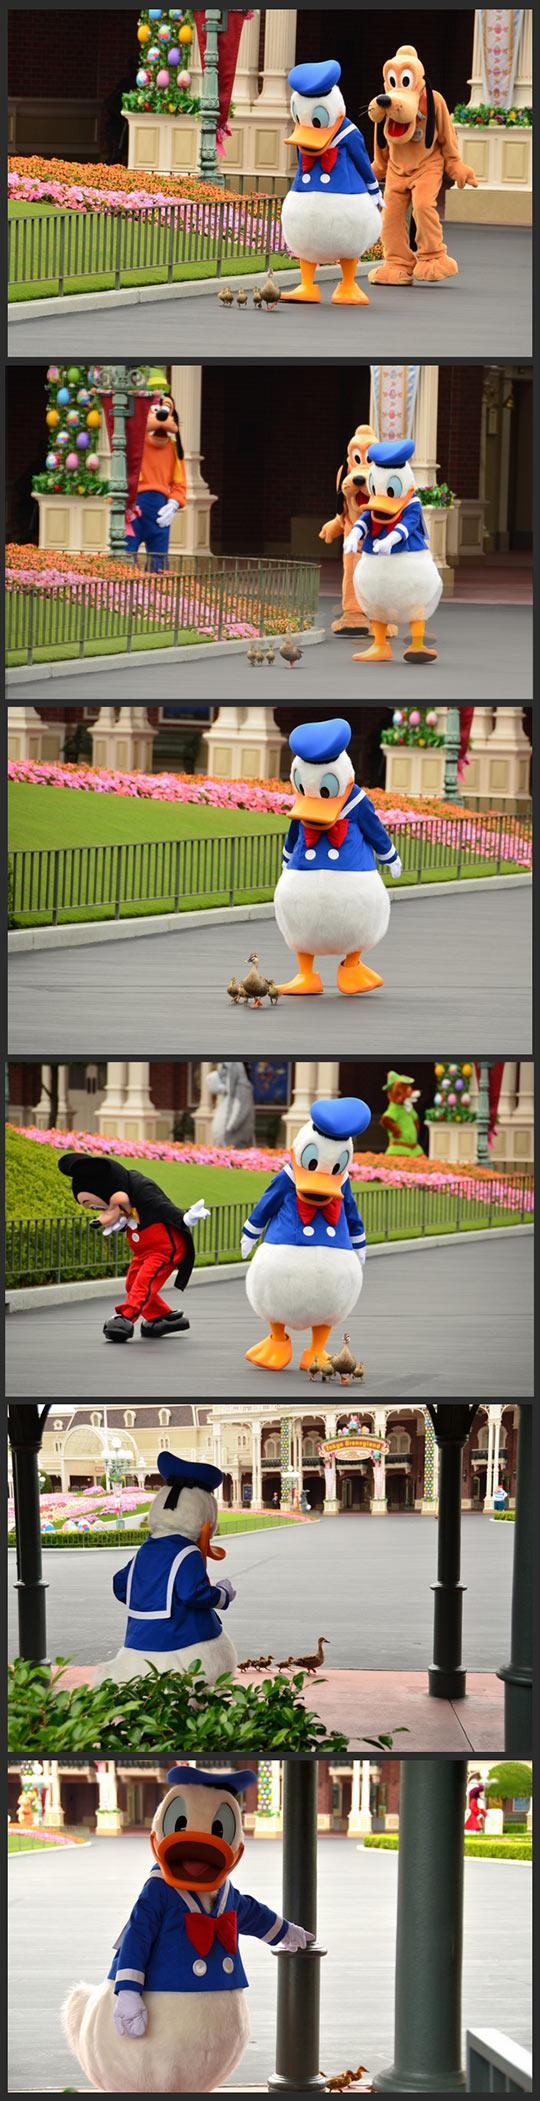 Donald was so pleased